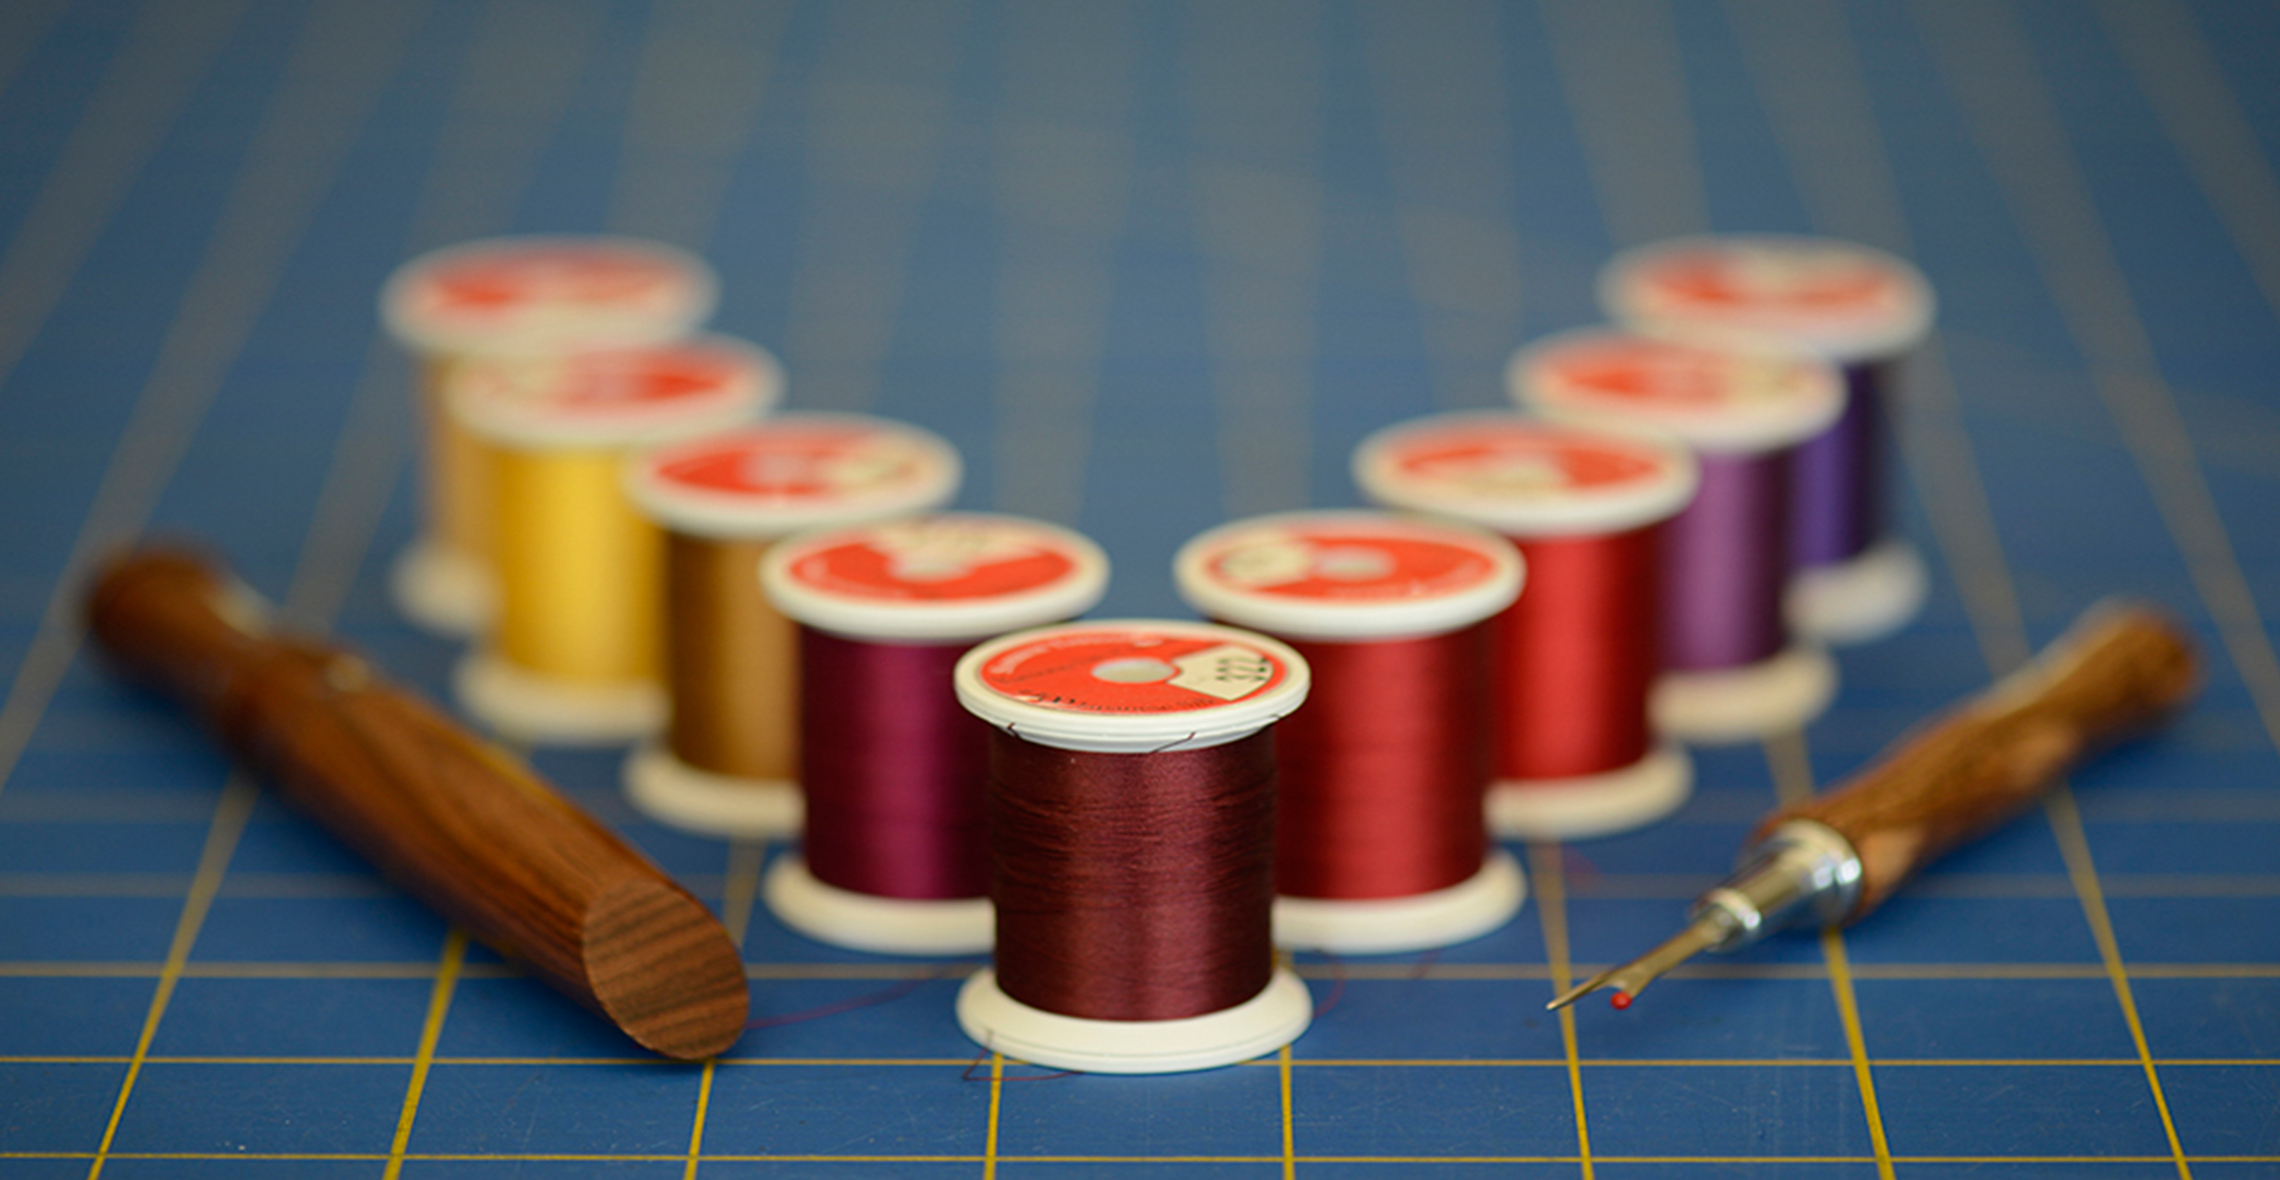 Photography Tips for your Sewing Projects